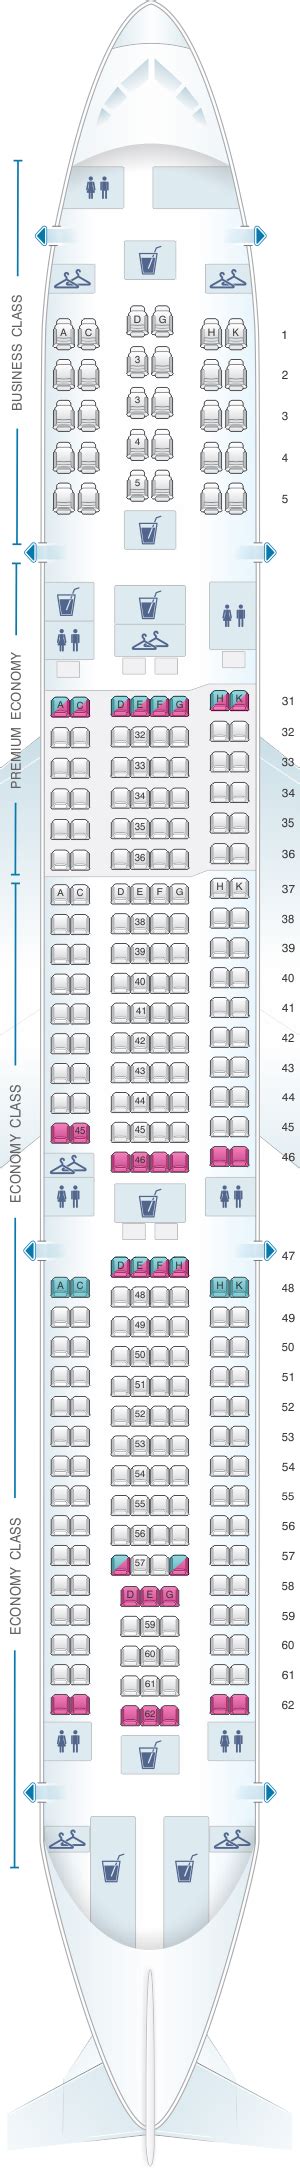 Airbus A330 300 Seat Map China Airlines